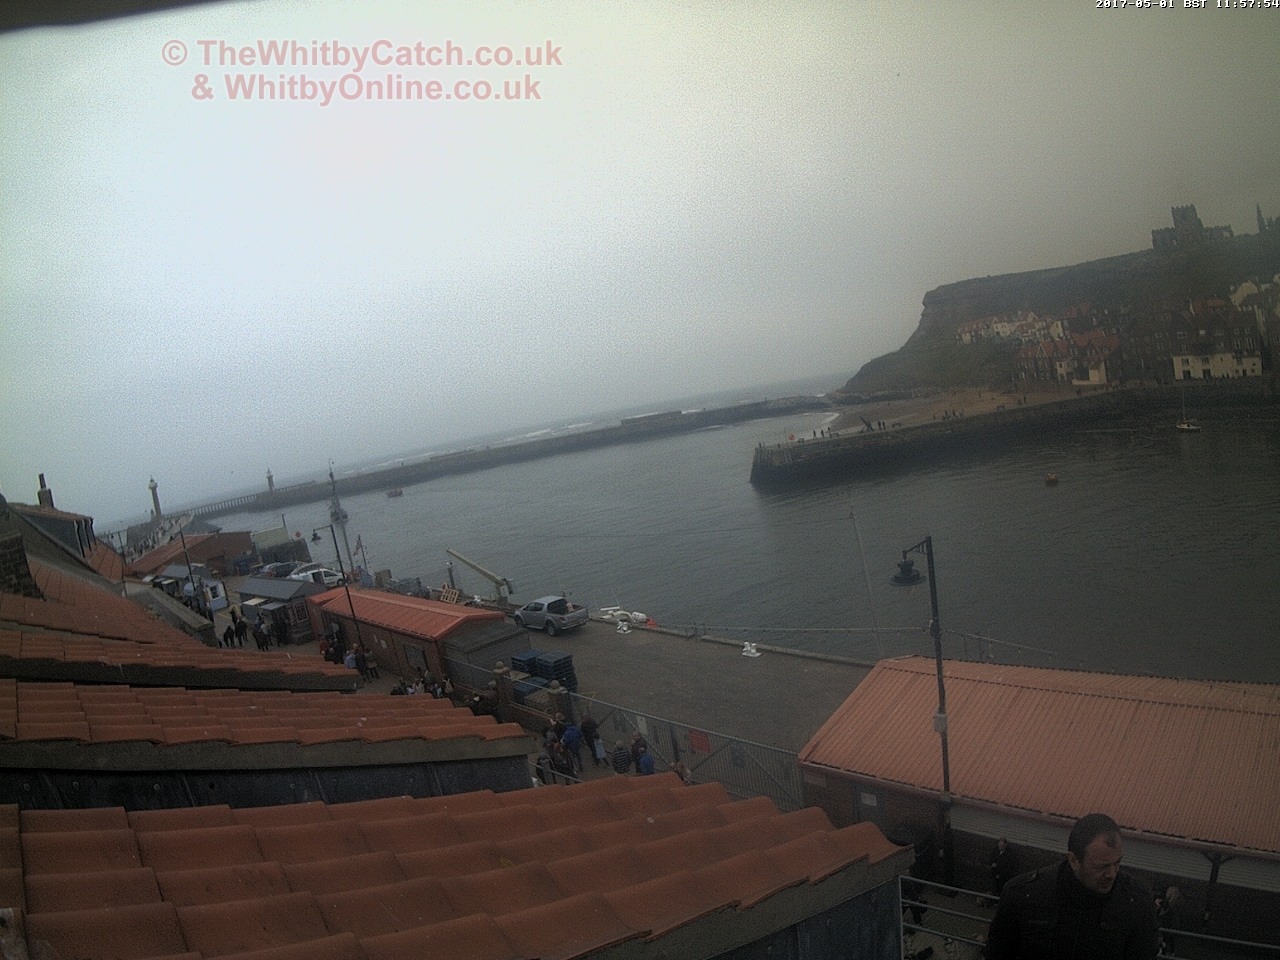 Whitby Mon 1st May 2017 11:58.